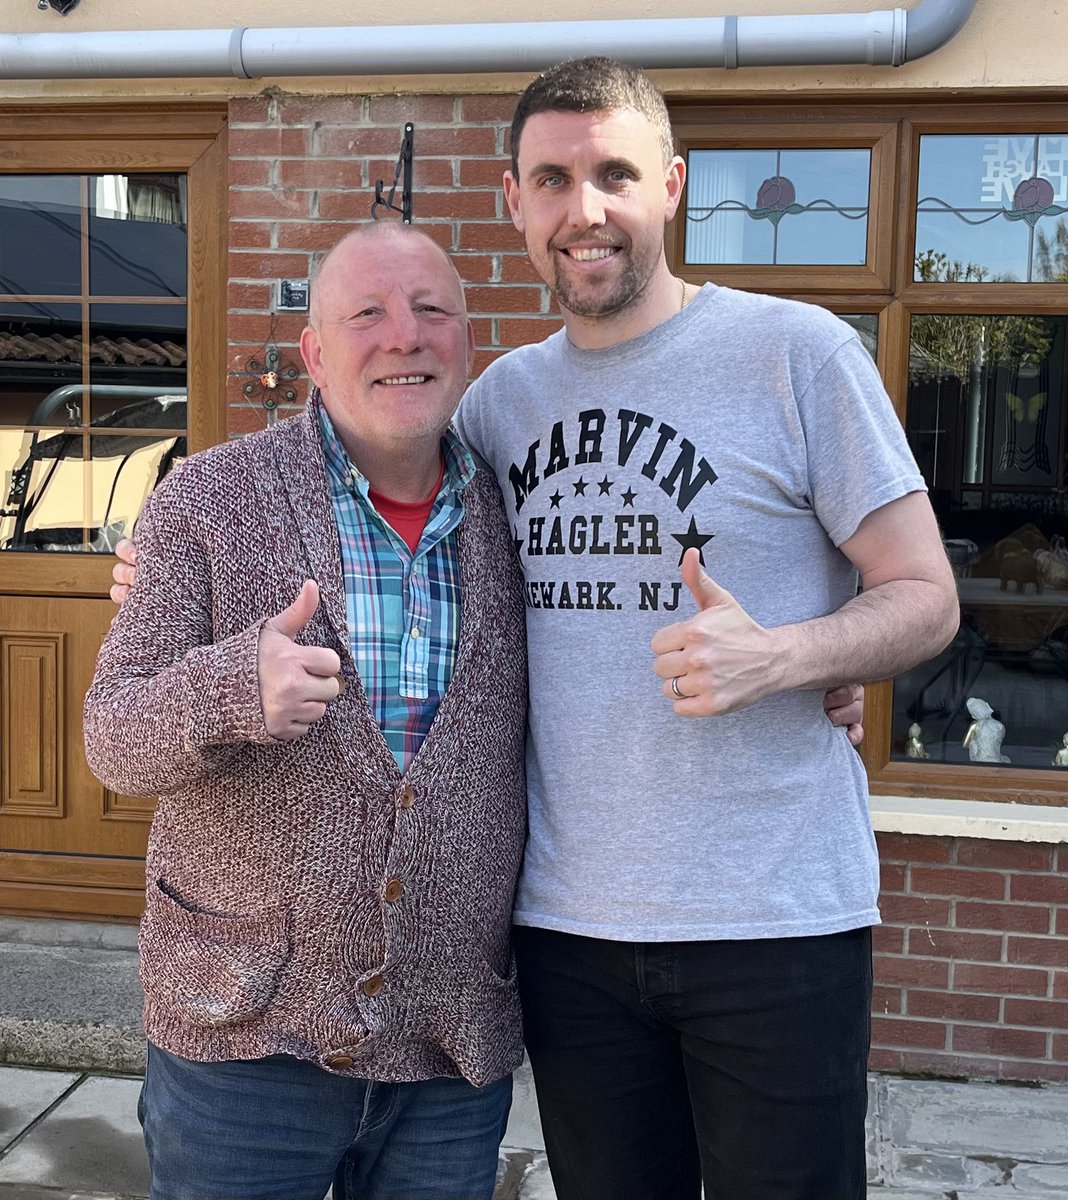 Today I sat down with my uncle, Eamonn Magee to chat a bit about his boxing career as well as a few tales from outside the ring. Tune in next week for the podcast release 👍🏻🥊 Sign up for early access to all episodes below: podcasters.spotify.com/pod/show/james…